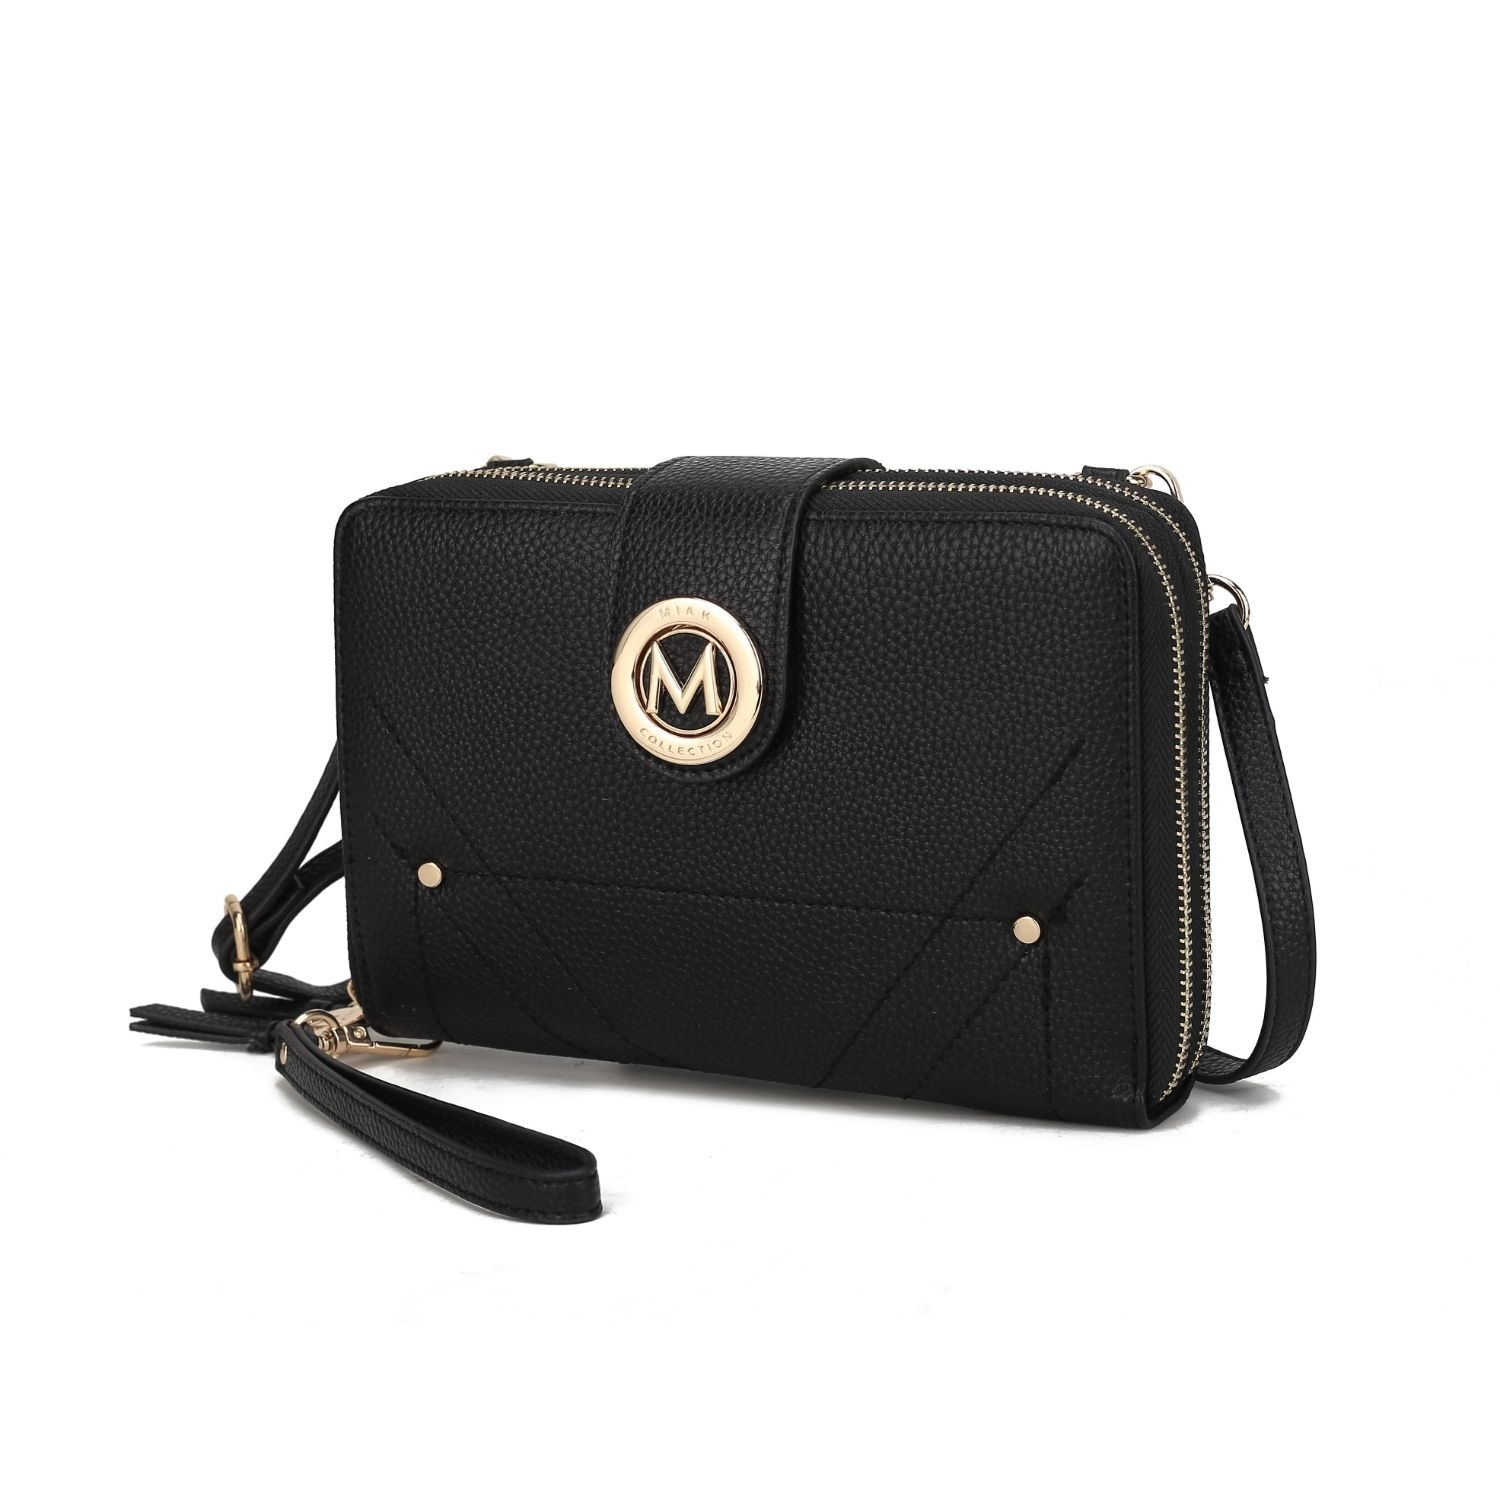 MKF Collection Sage Cell-phone - Wallet Crossbody Handbag With Optional Wristlet By Mia K - Cognac